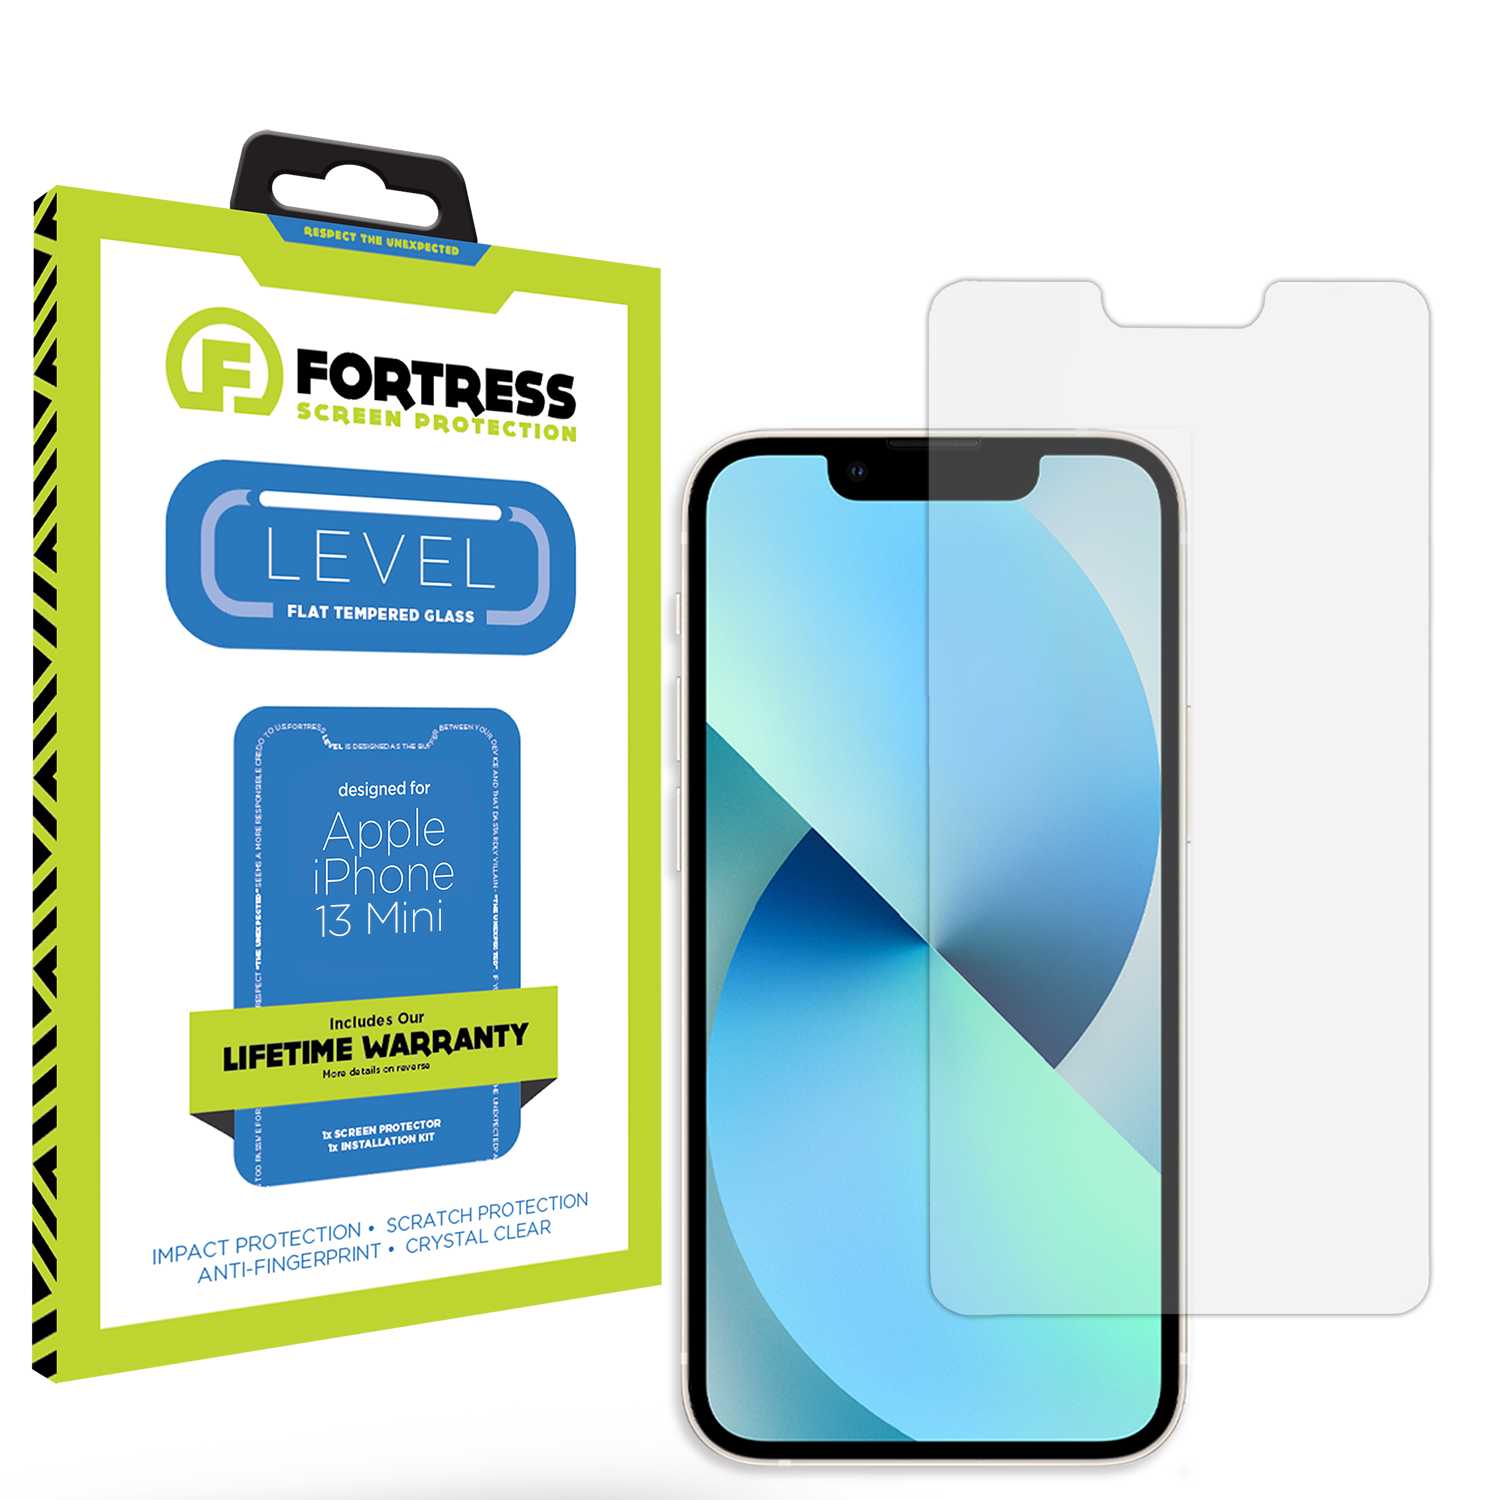 Fortress iPhone 13 Mini Screen Protector $0Coverage Scooch Screen Protector